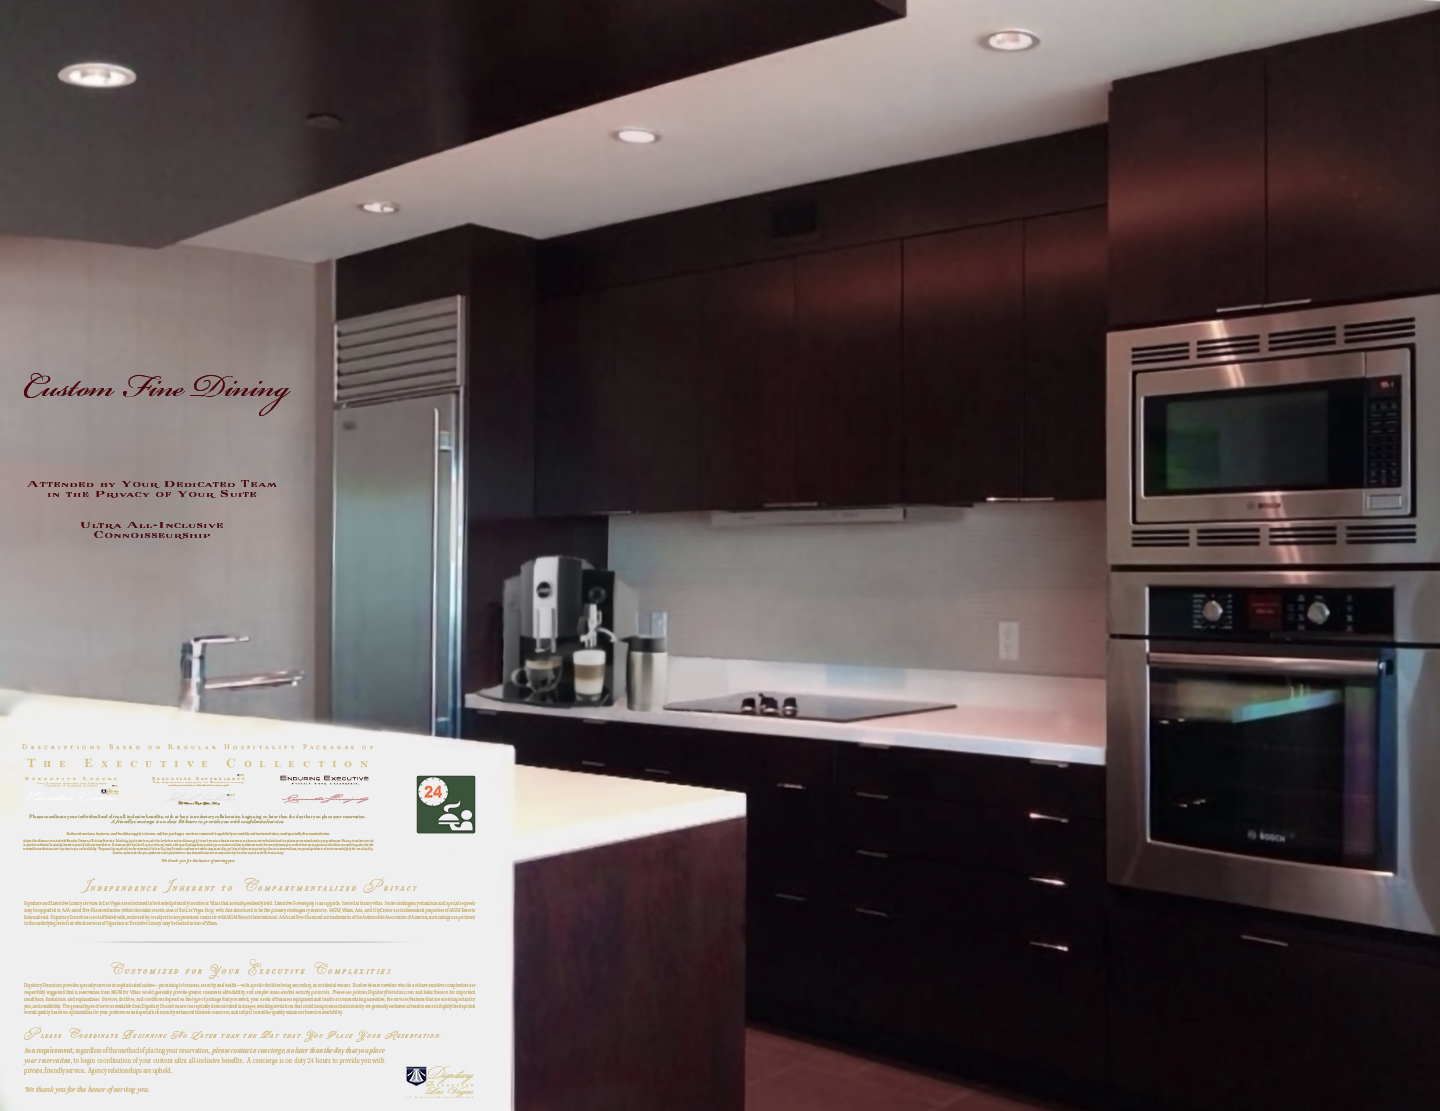 Executive Luxury suites feature full kitchens used by your 24-hour dedicated servants